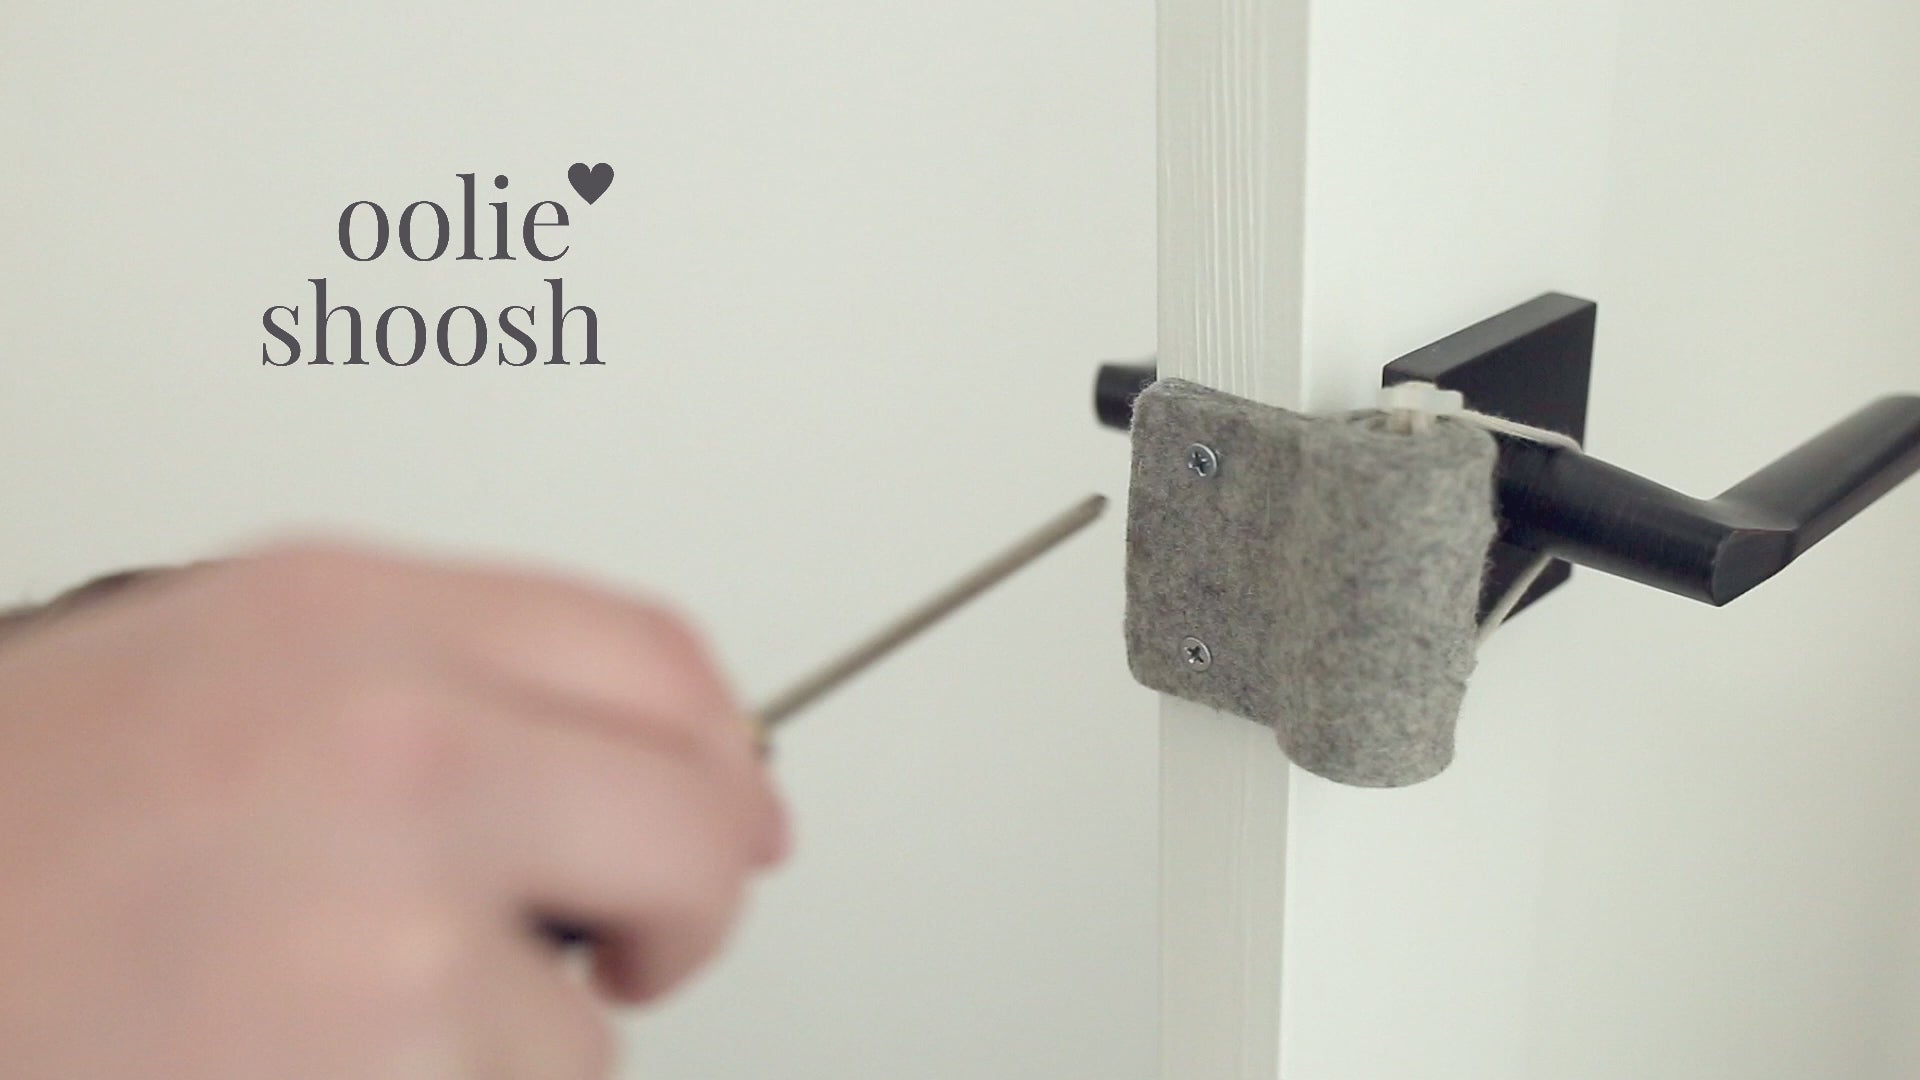 Video showing an adult installing an Oolie Shoosh with a Phillips screwdriver, then a young child closing his door and tugging on the Shoosh. Another adult demonstrates attempting to close the door with the Shoosh in Bumper Mode, but the door is prevented from closing. Then the Shoosh is shown installed in Silencing Mode, in which the door closes, but without a sound.